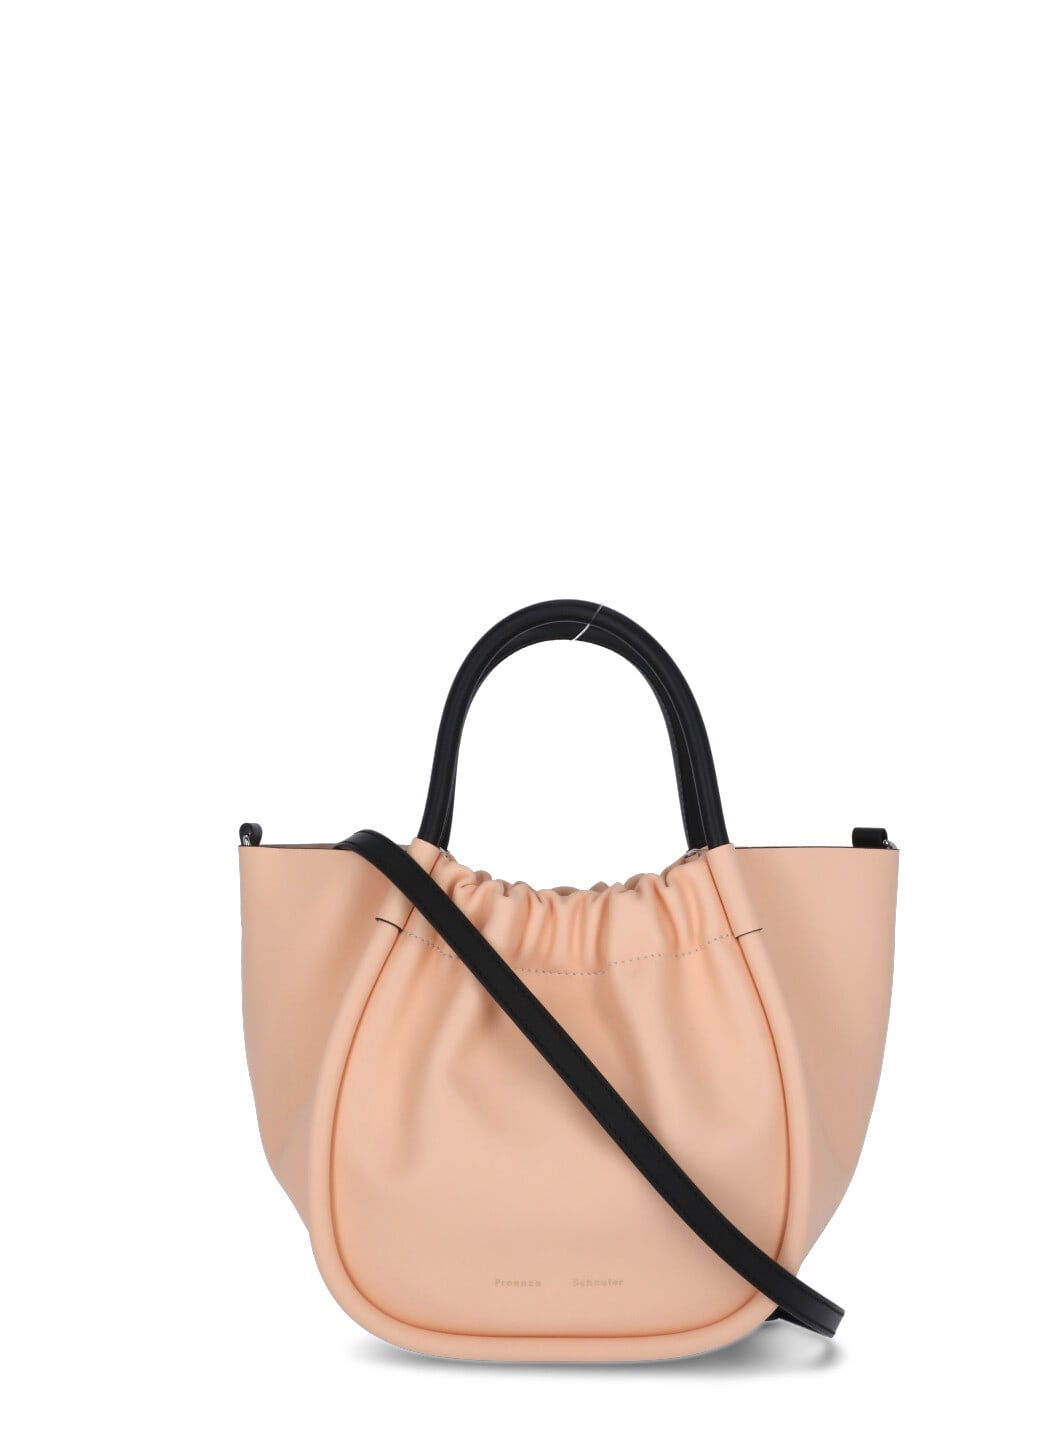 PROENZA SCHOULER SMALL RUCHED TOTE,H01015 285